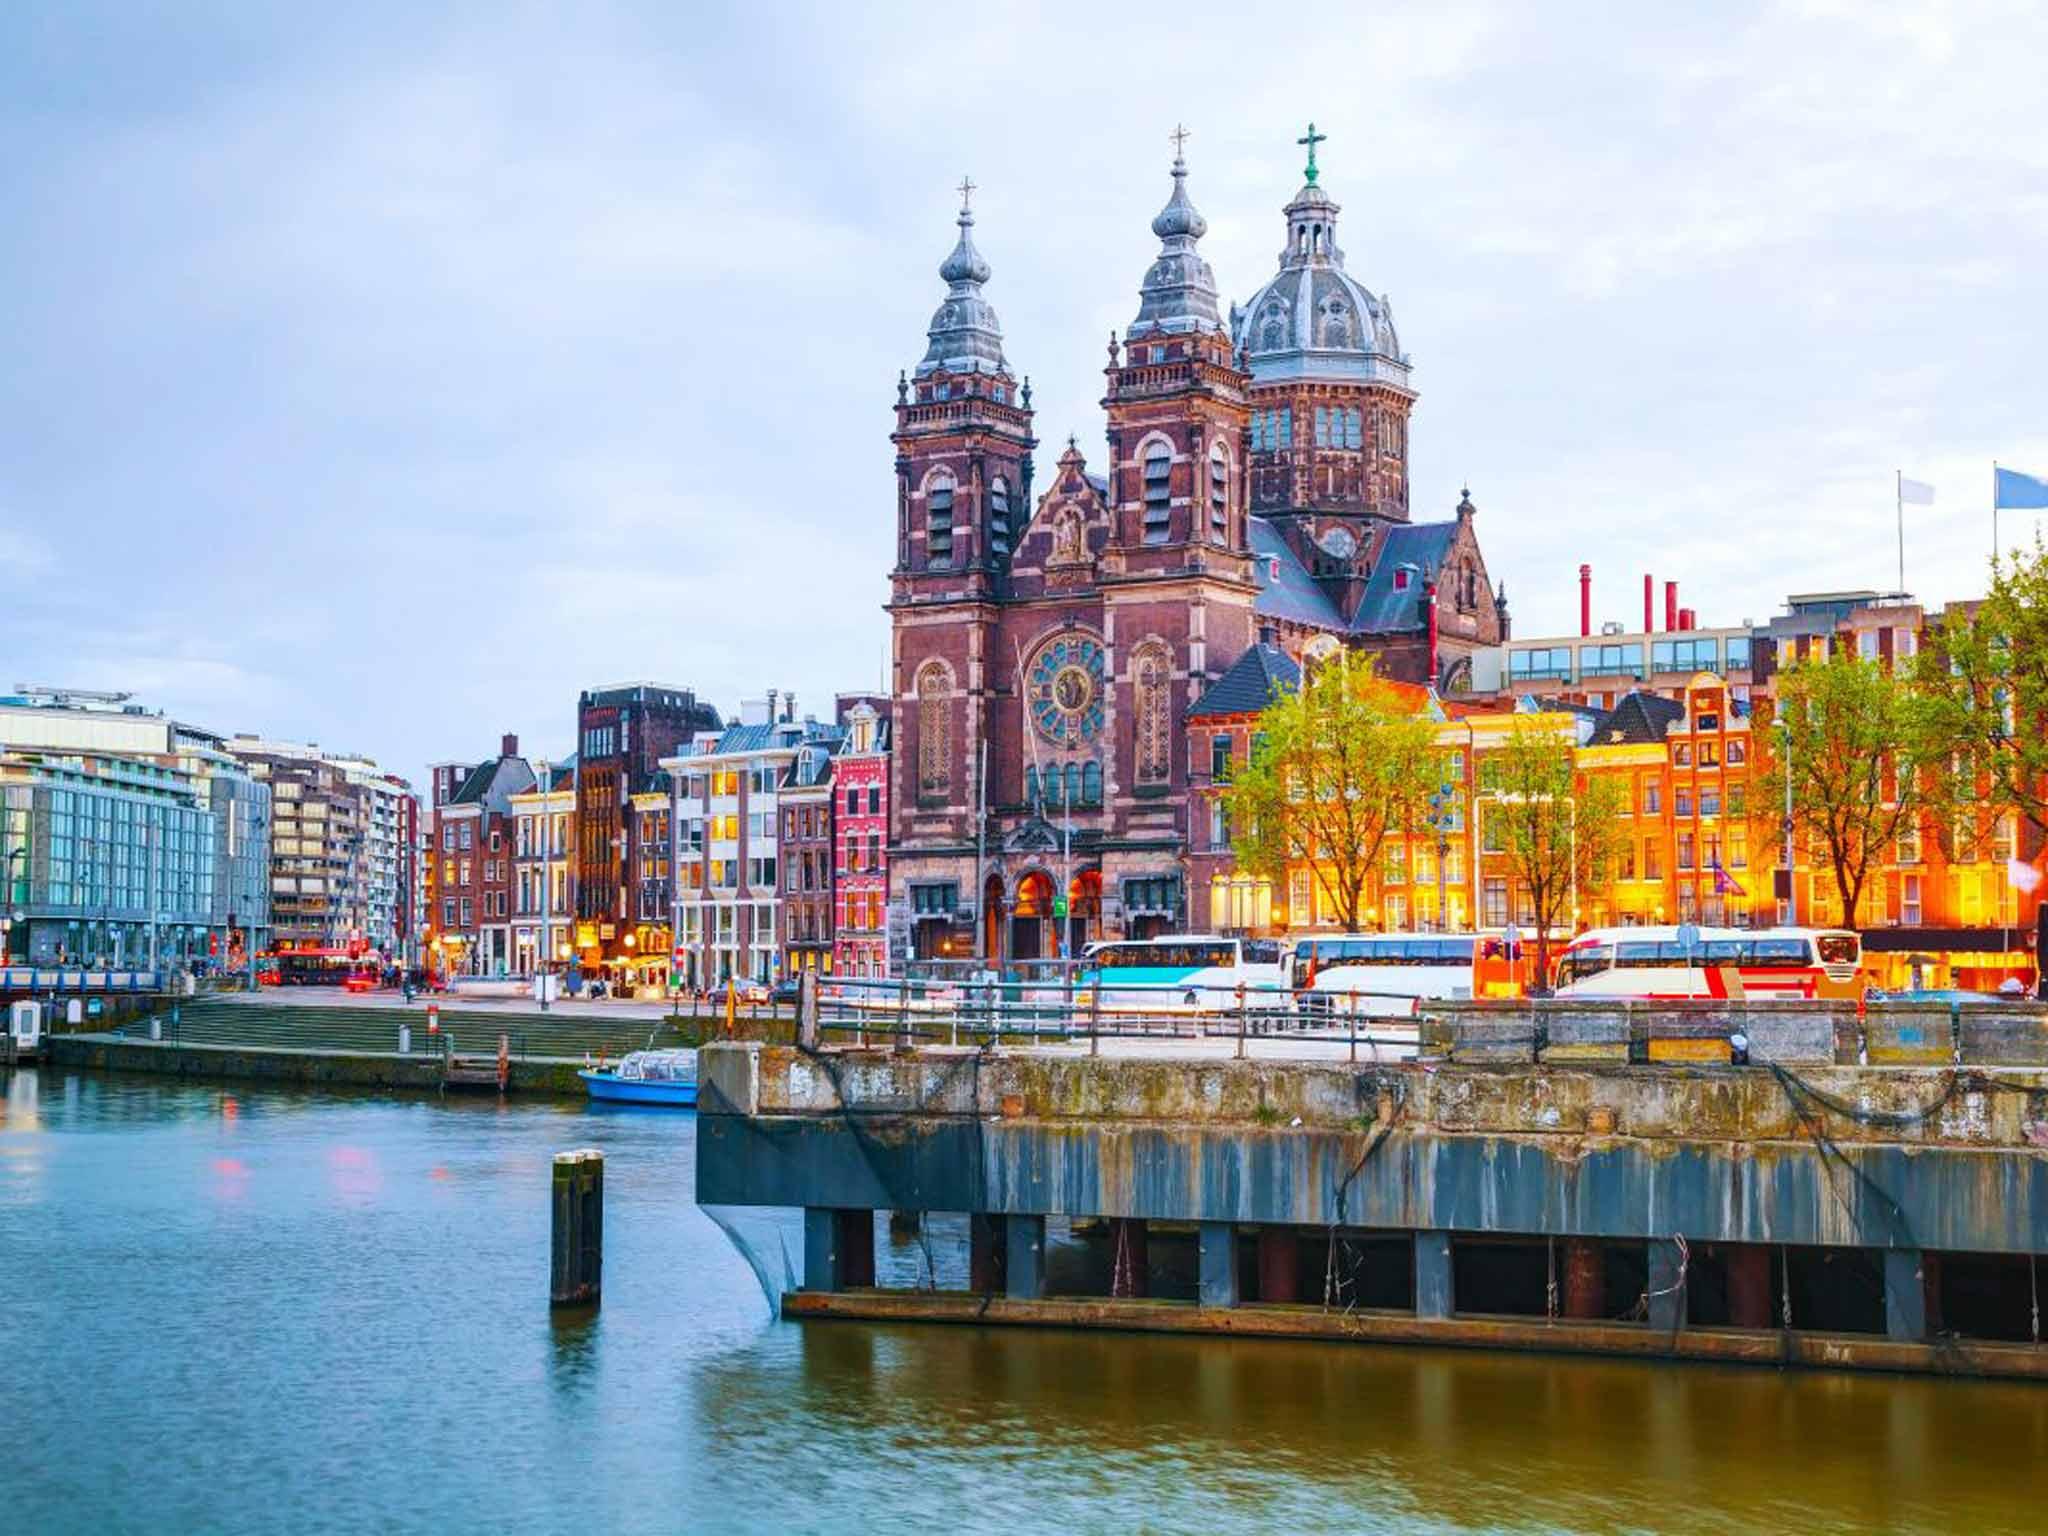 Amsterdam travel tips: Where to go and what to see in 48 hours